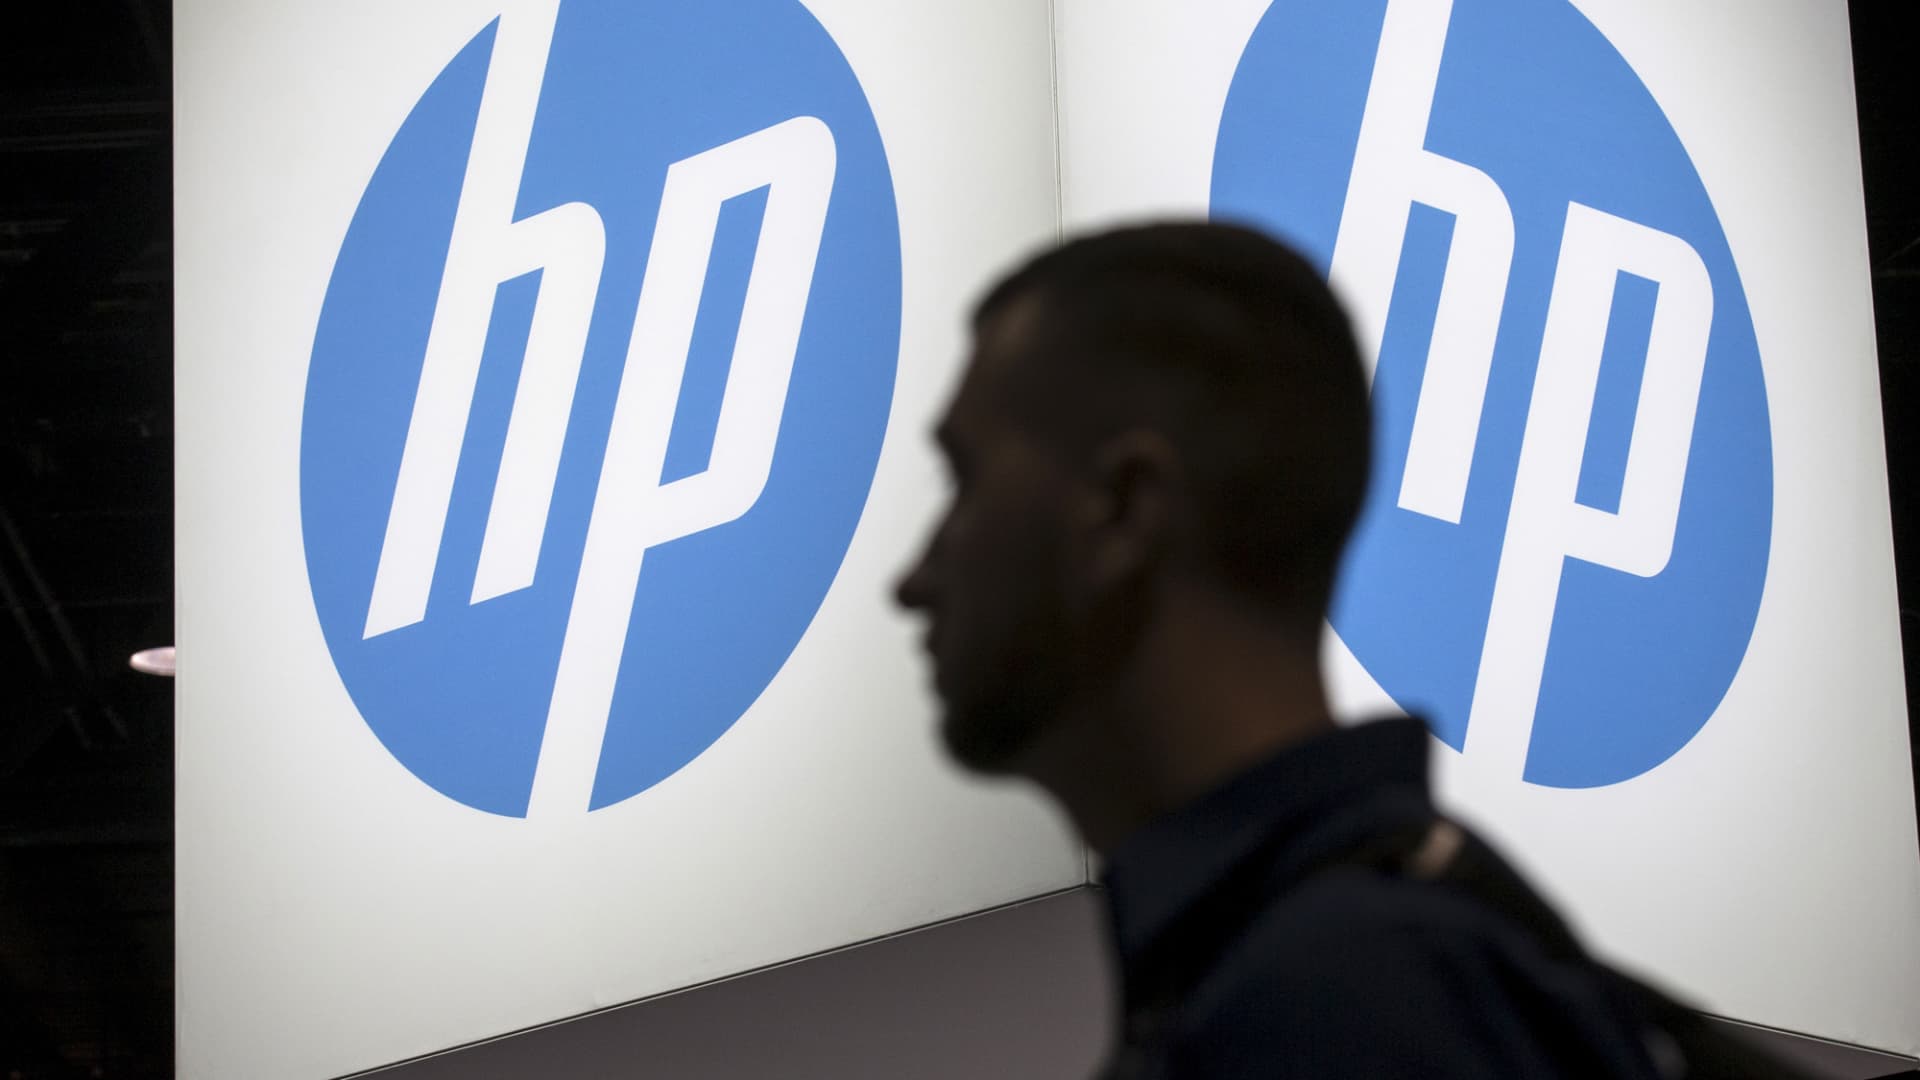 Evercore ISI downgrades HP, lowers earnings estimates on tough PC market later this year